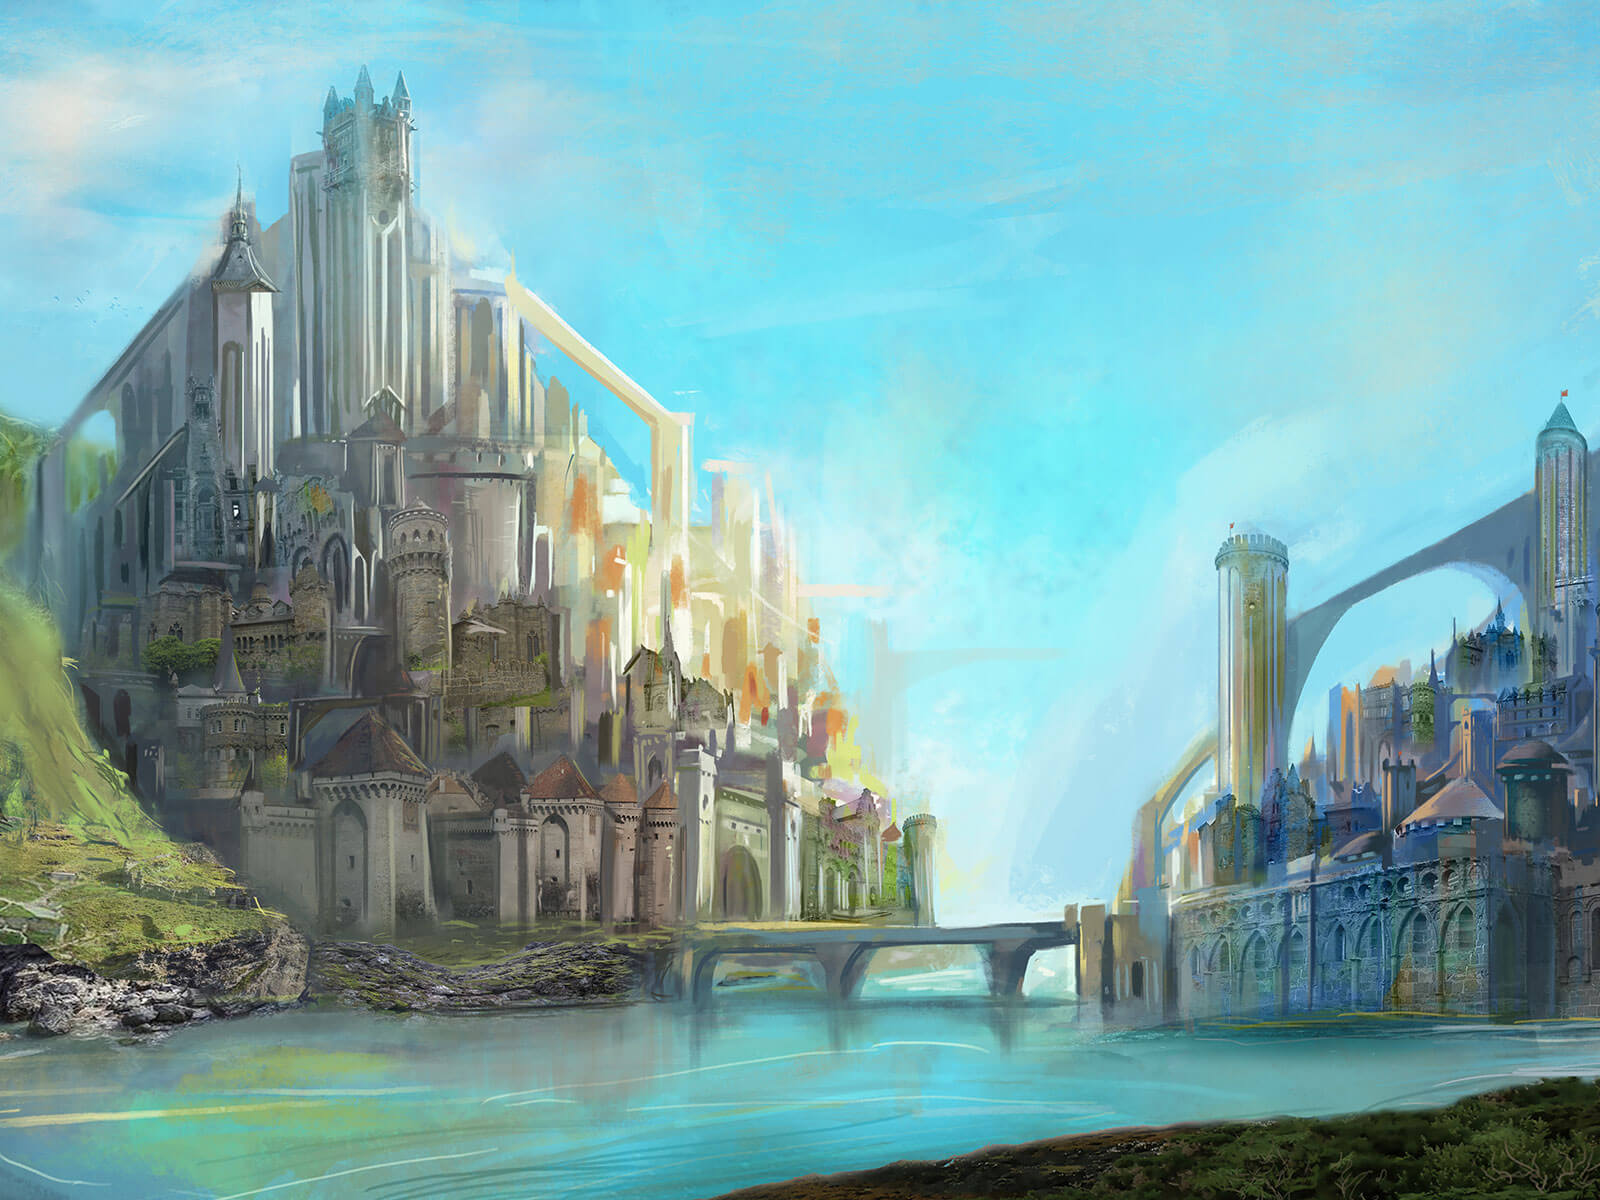 Two high-fantasy-style cities are connected by a single bridge across the river separating them.